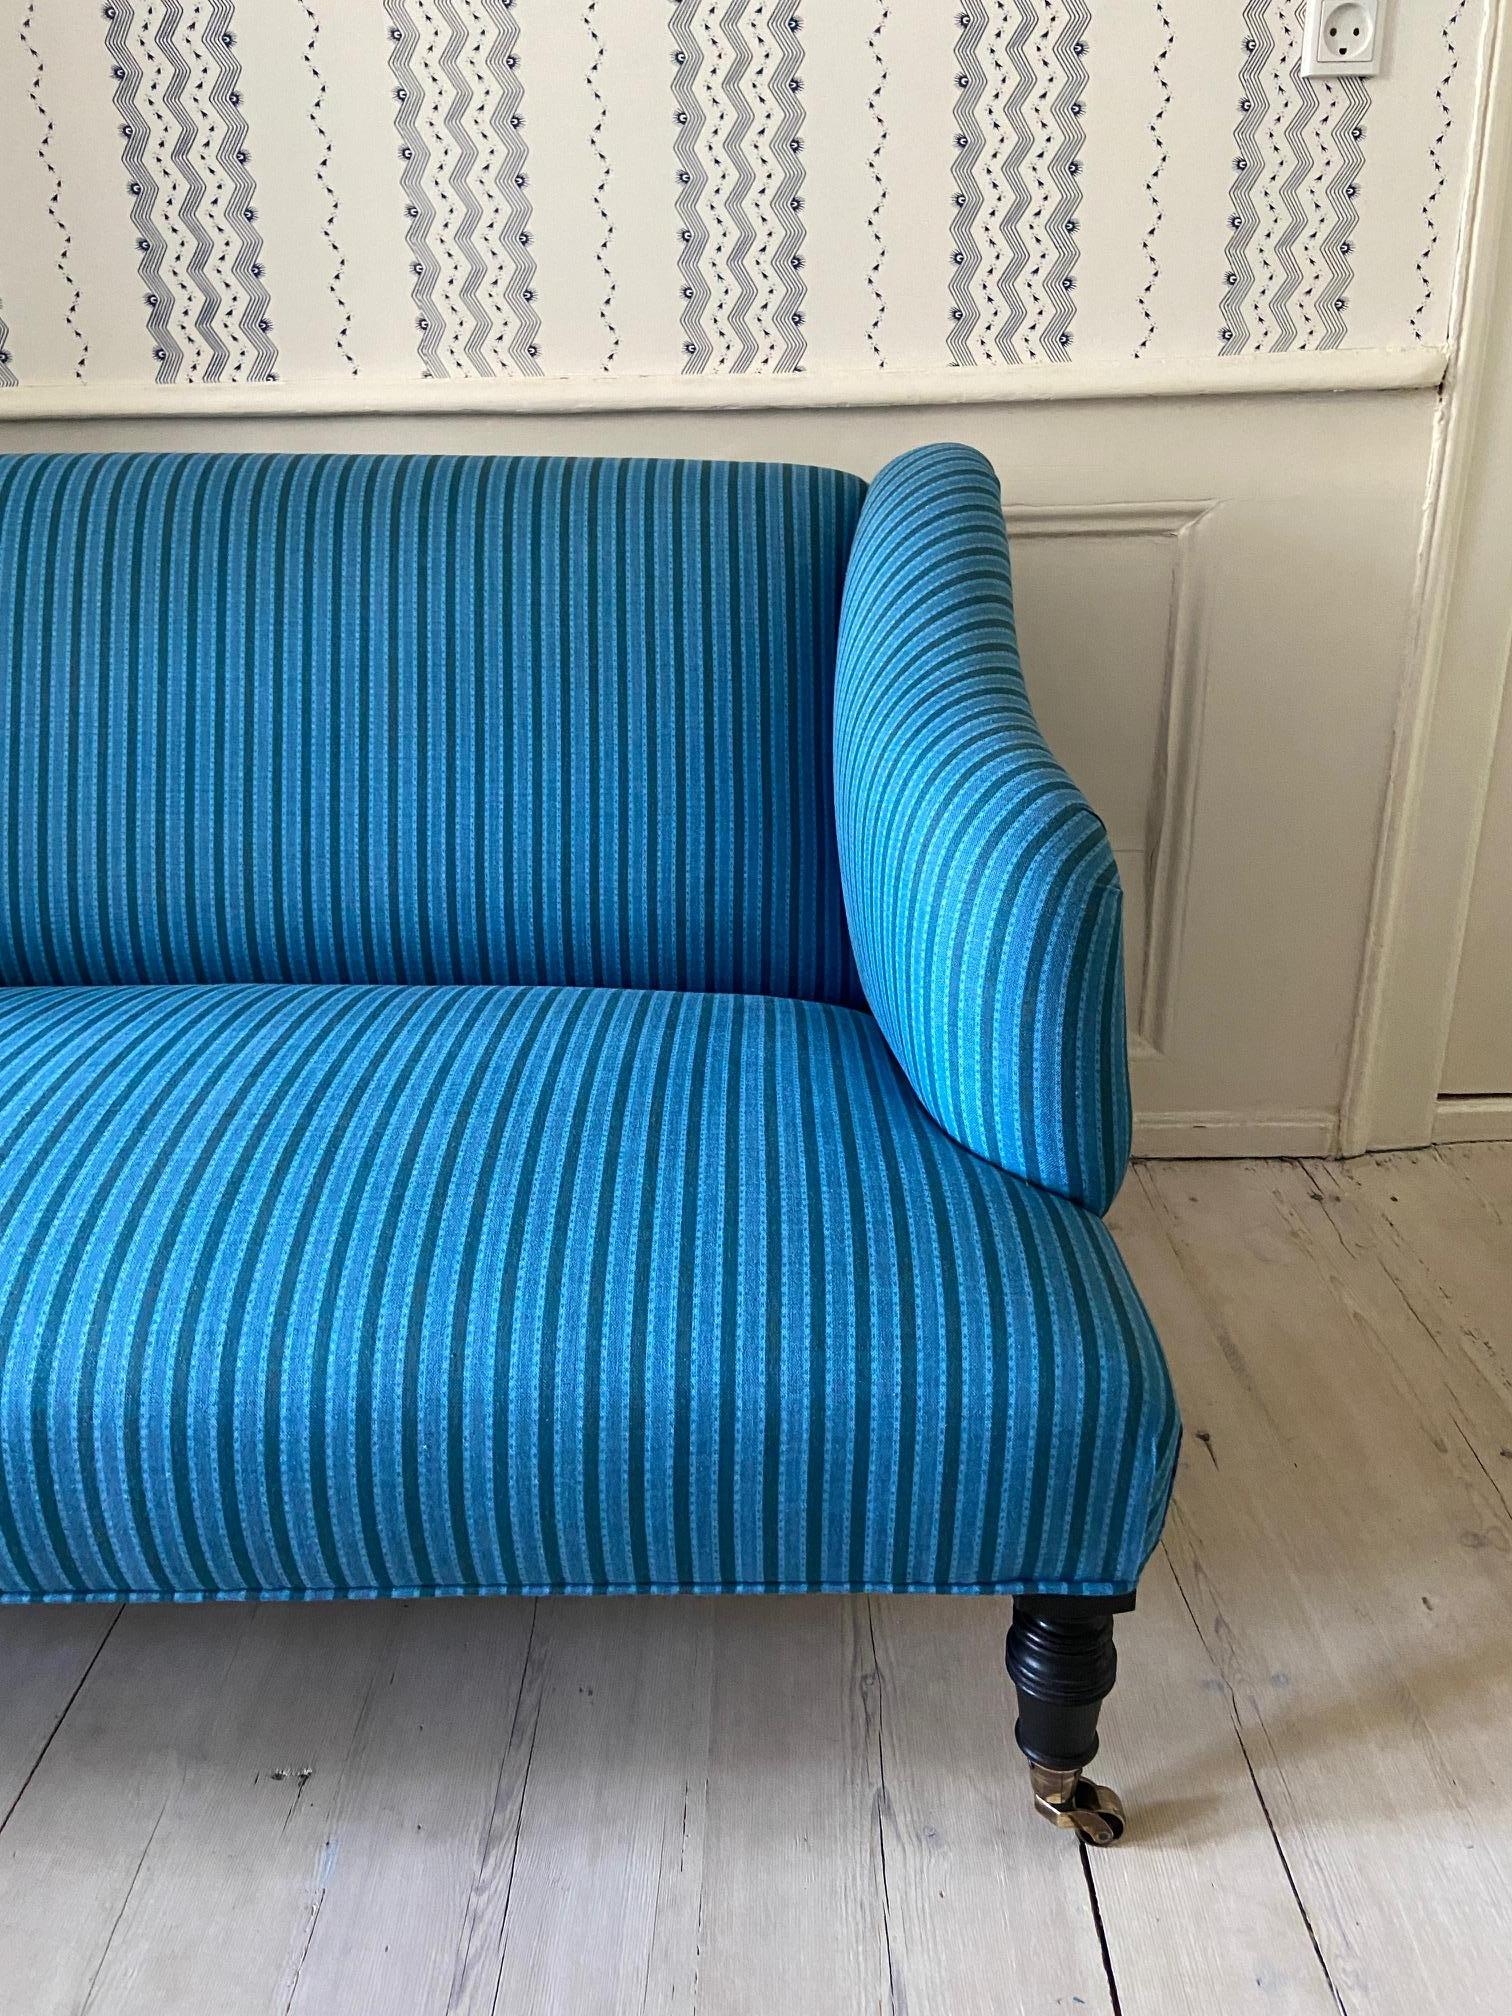 blue and white striped couch